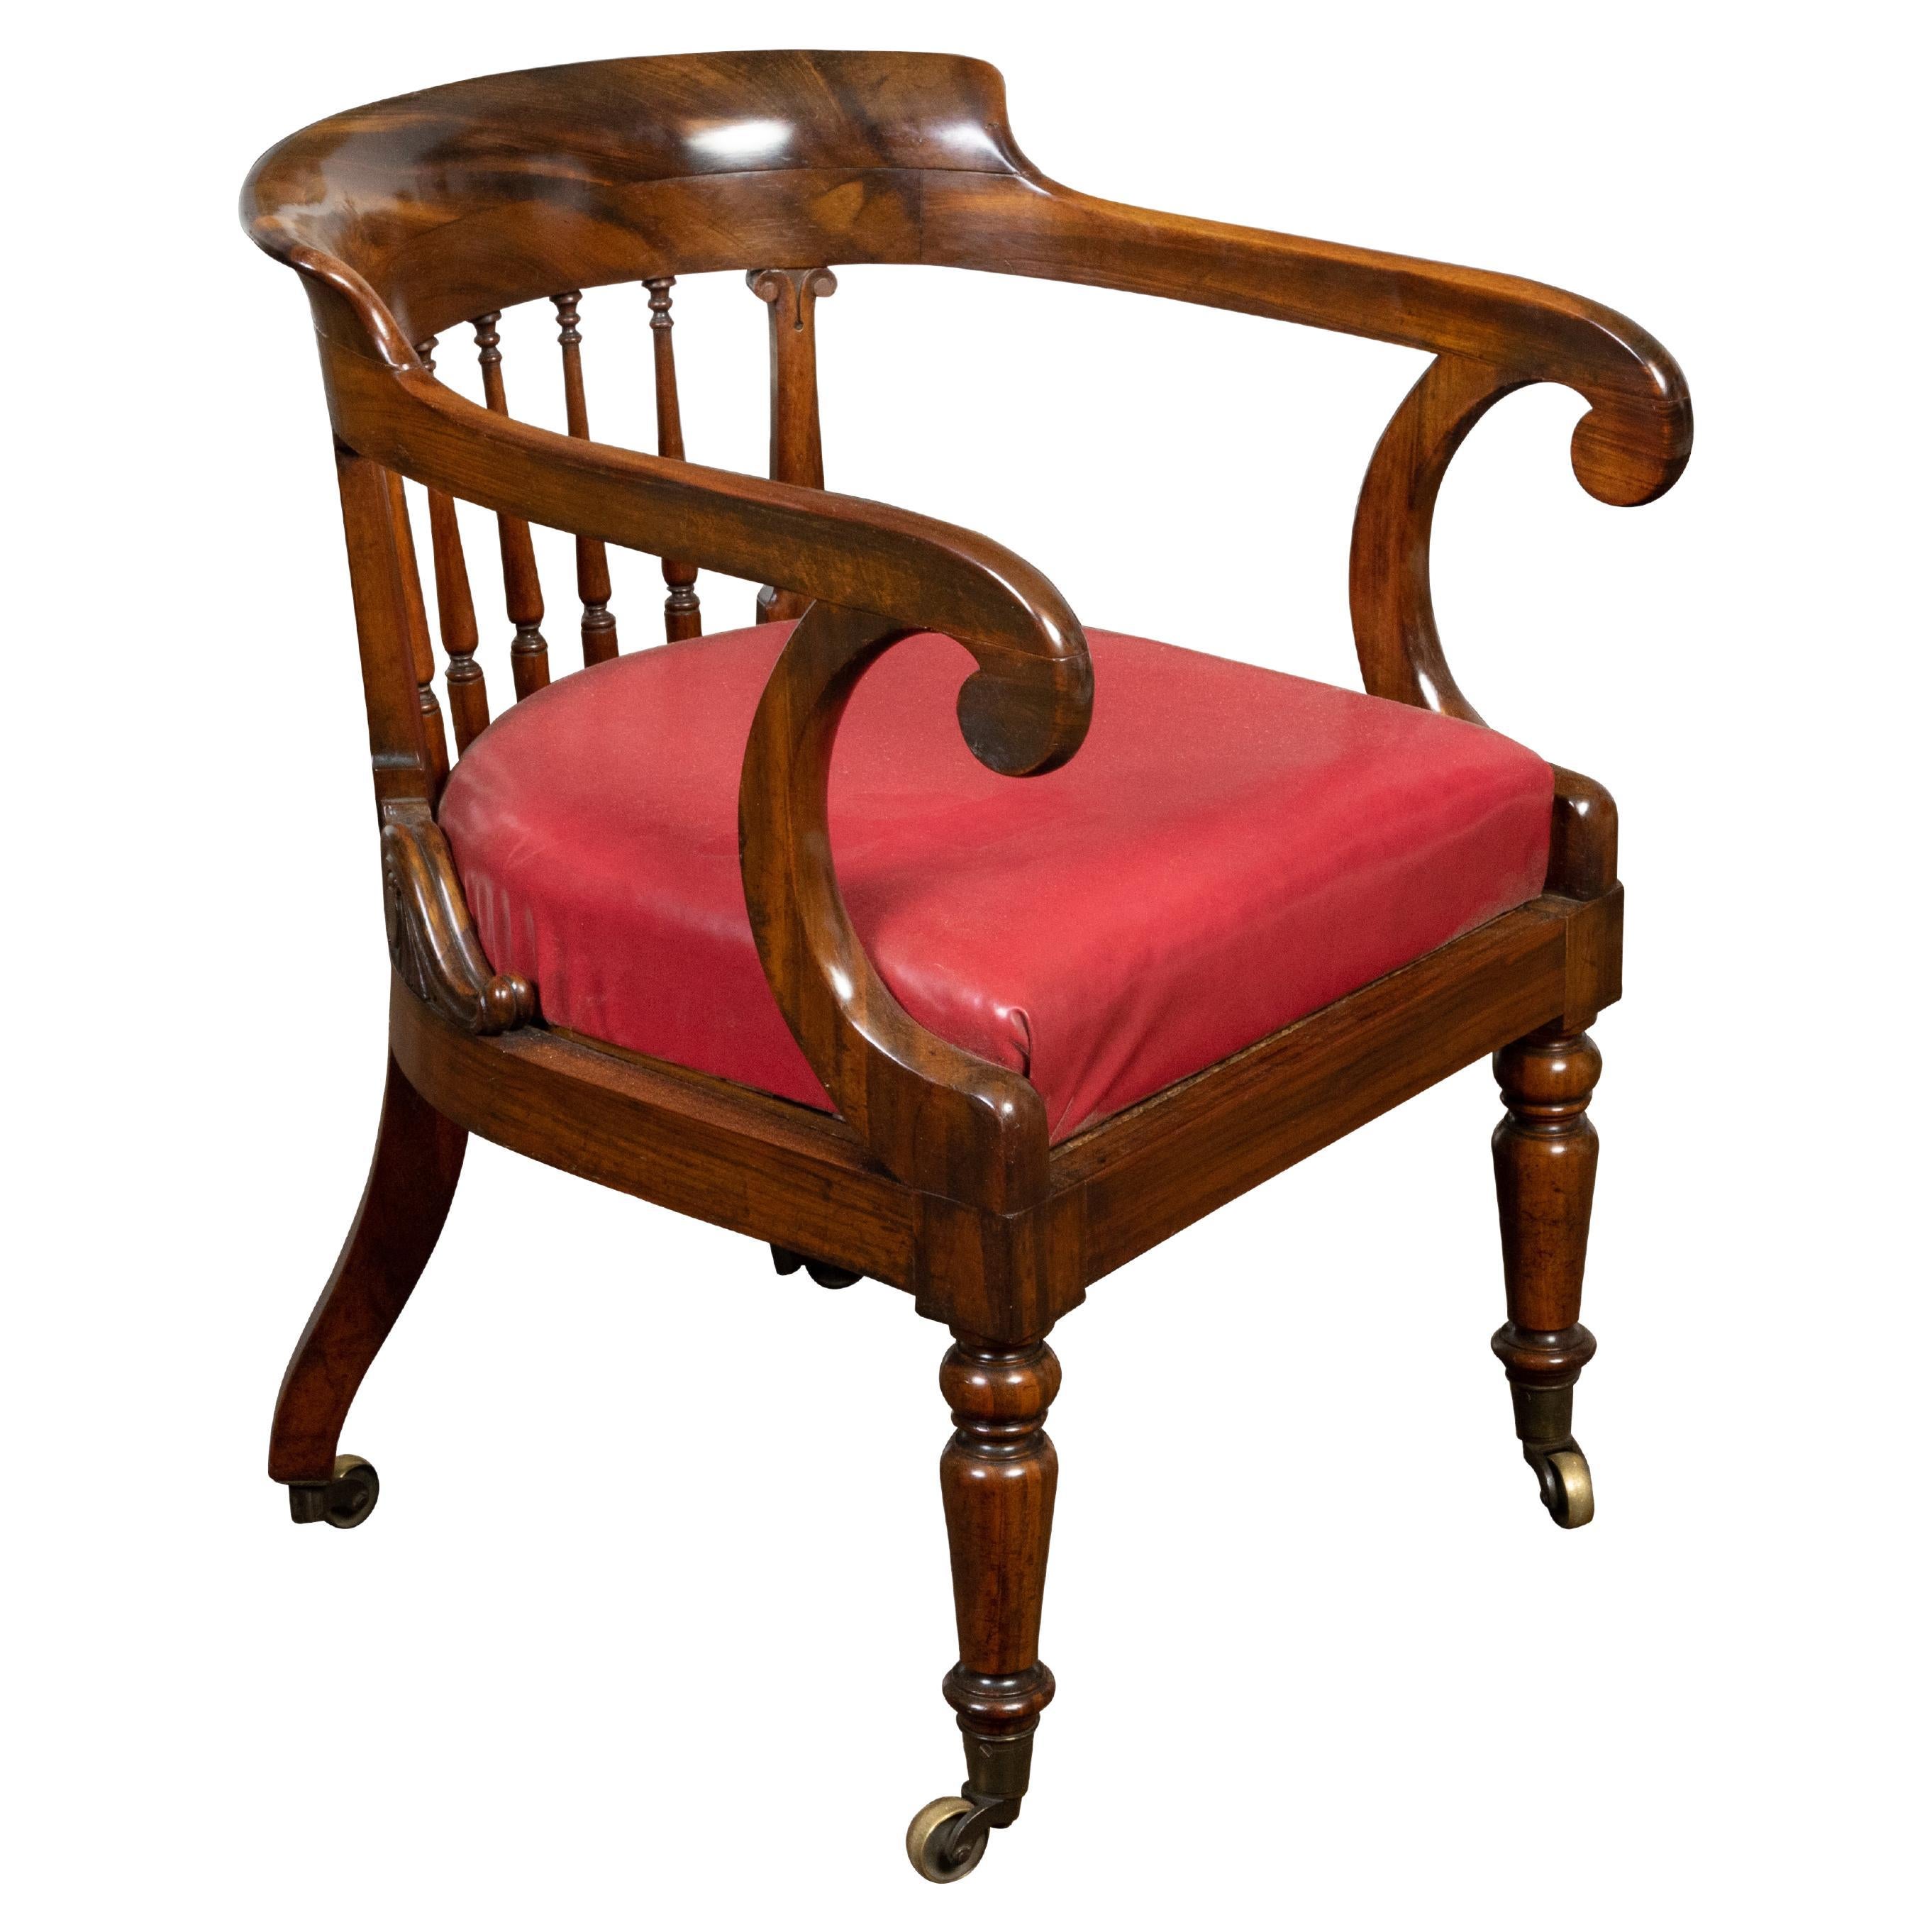 English Regency Period 19th Century Mahogany Horseshoe Back Upholstered Armchair For Sale